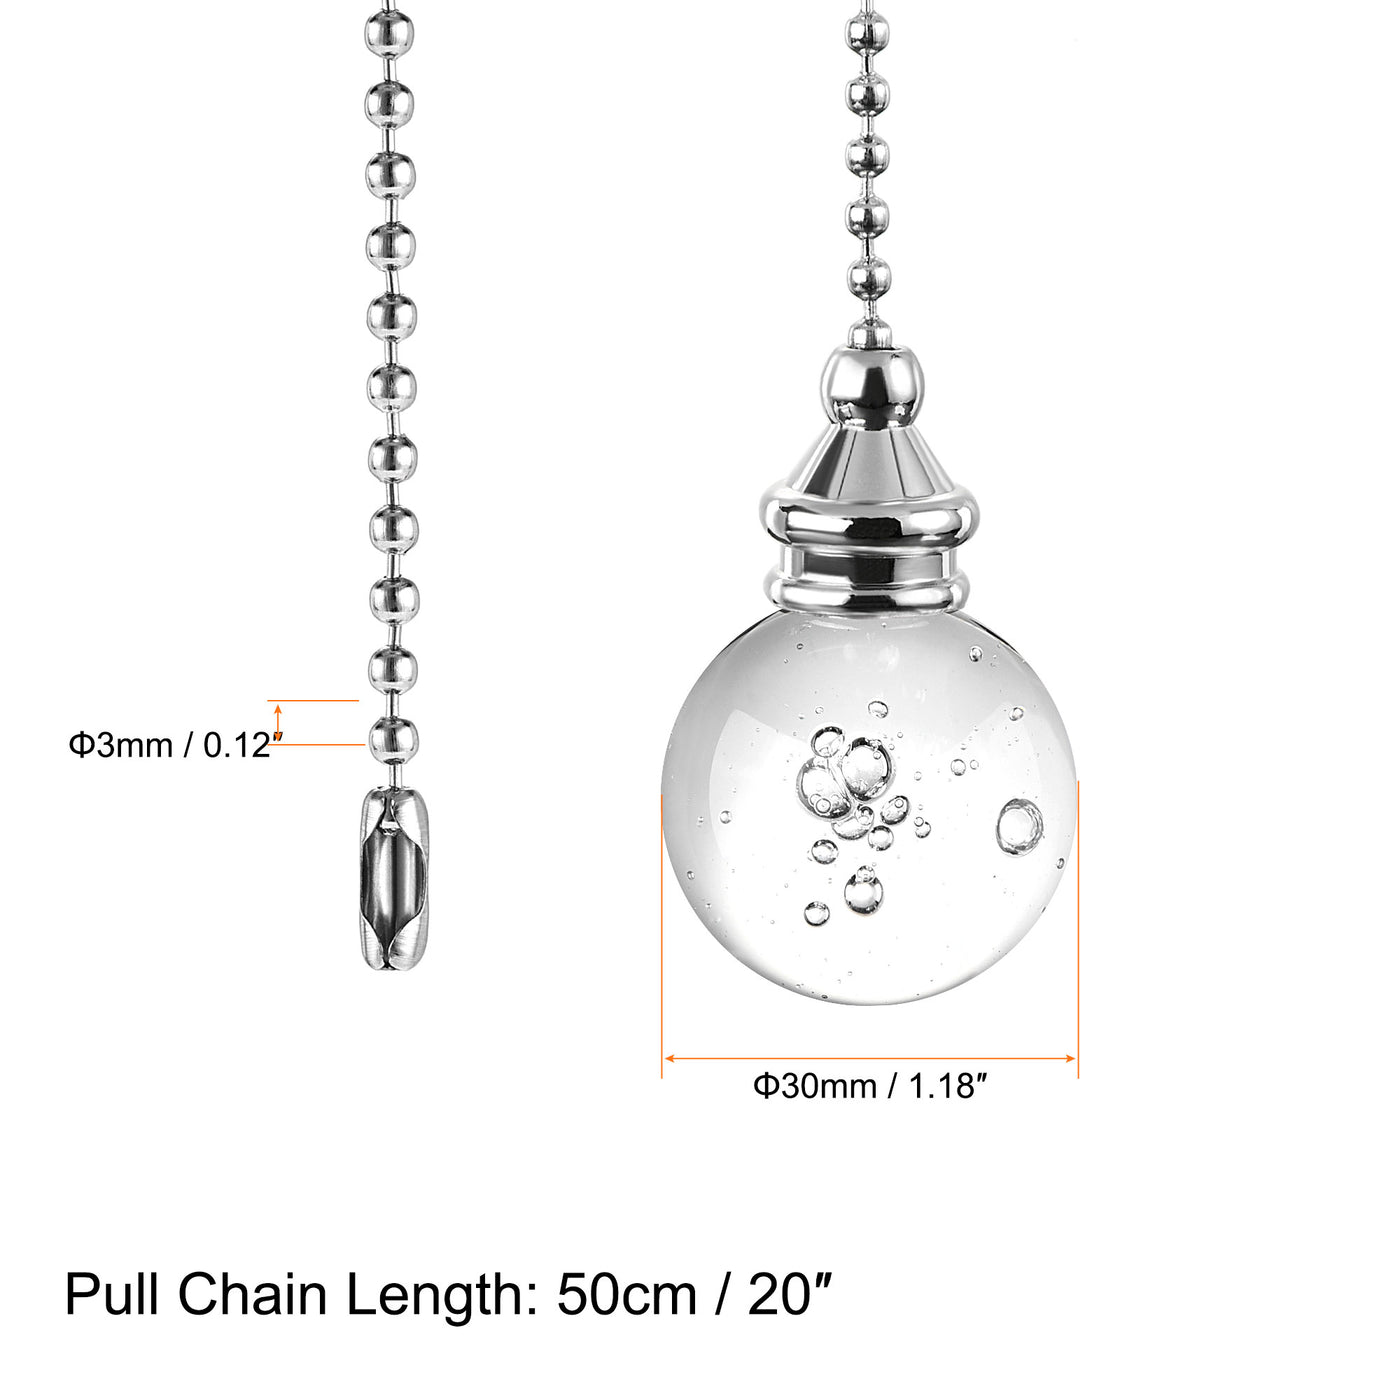 uxcell Uxcell 20 Inch Ceiling Fan Pull Chain, Decorative Crystal Fan Pull Chain Ornament Extension,  30mm Bubble Ball Pendant, Clear